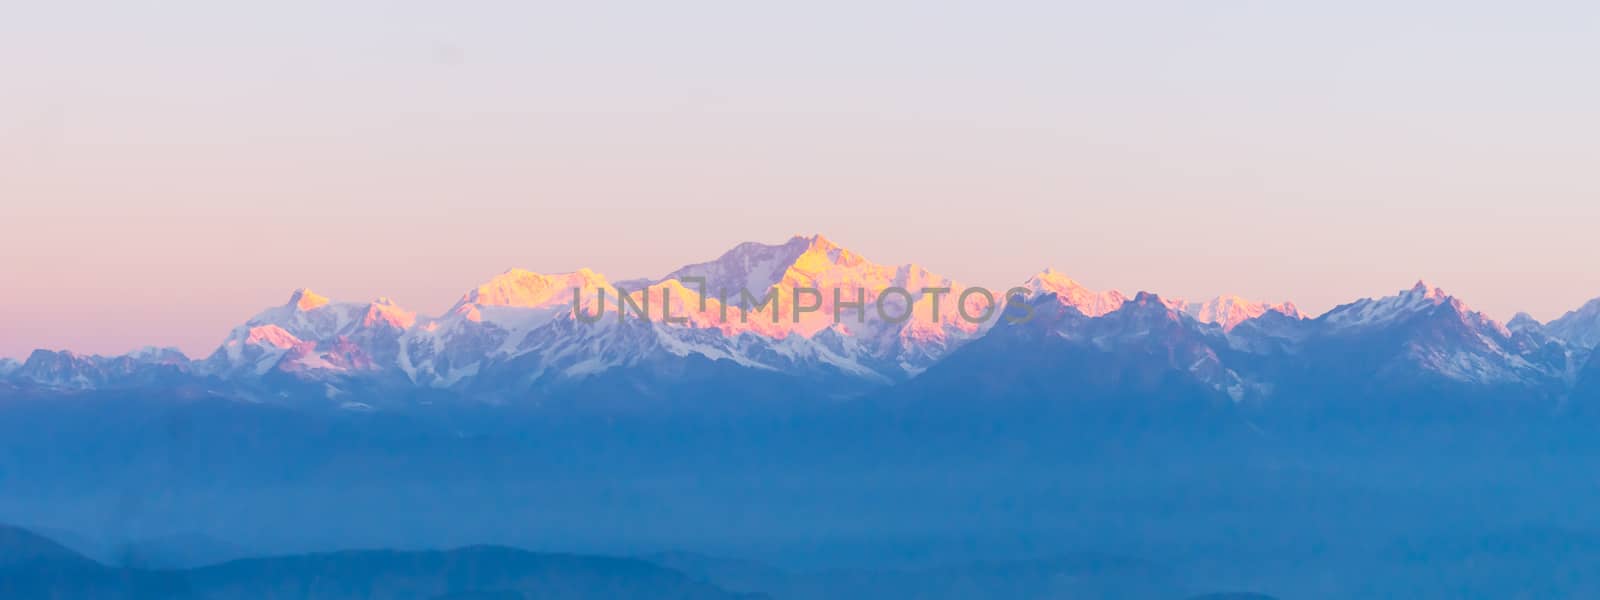 Panorama of majestic Mount Kanchendzonga range of himalayas at first sunrise from Tiger Hill. First ray of sun struck mountain starting beautiful day on entire nature around. Darjeeling, Sikkim, India